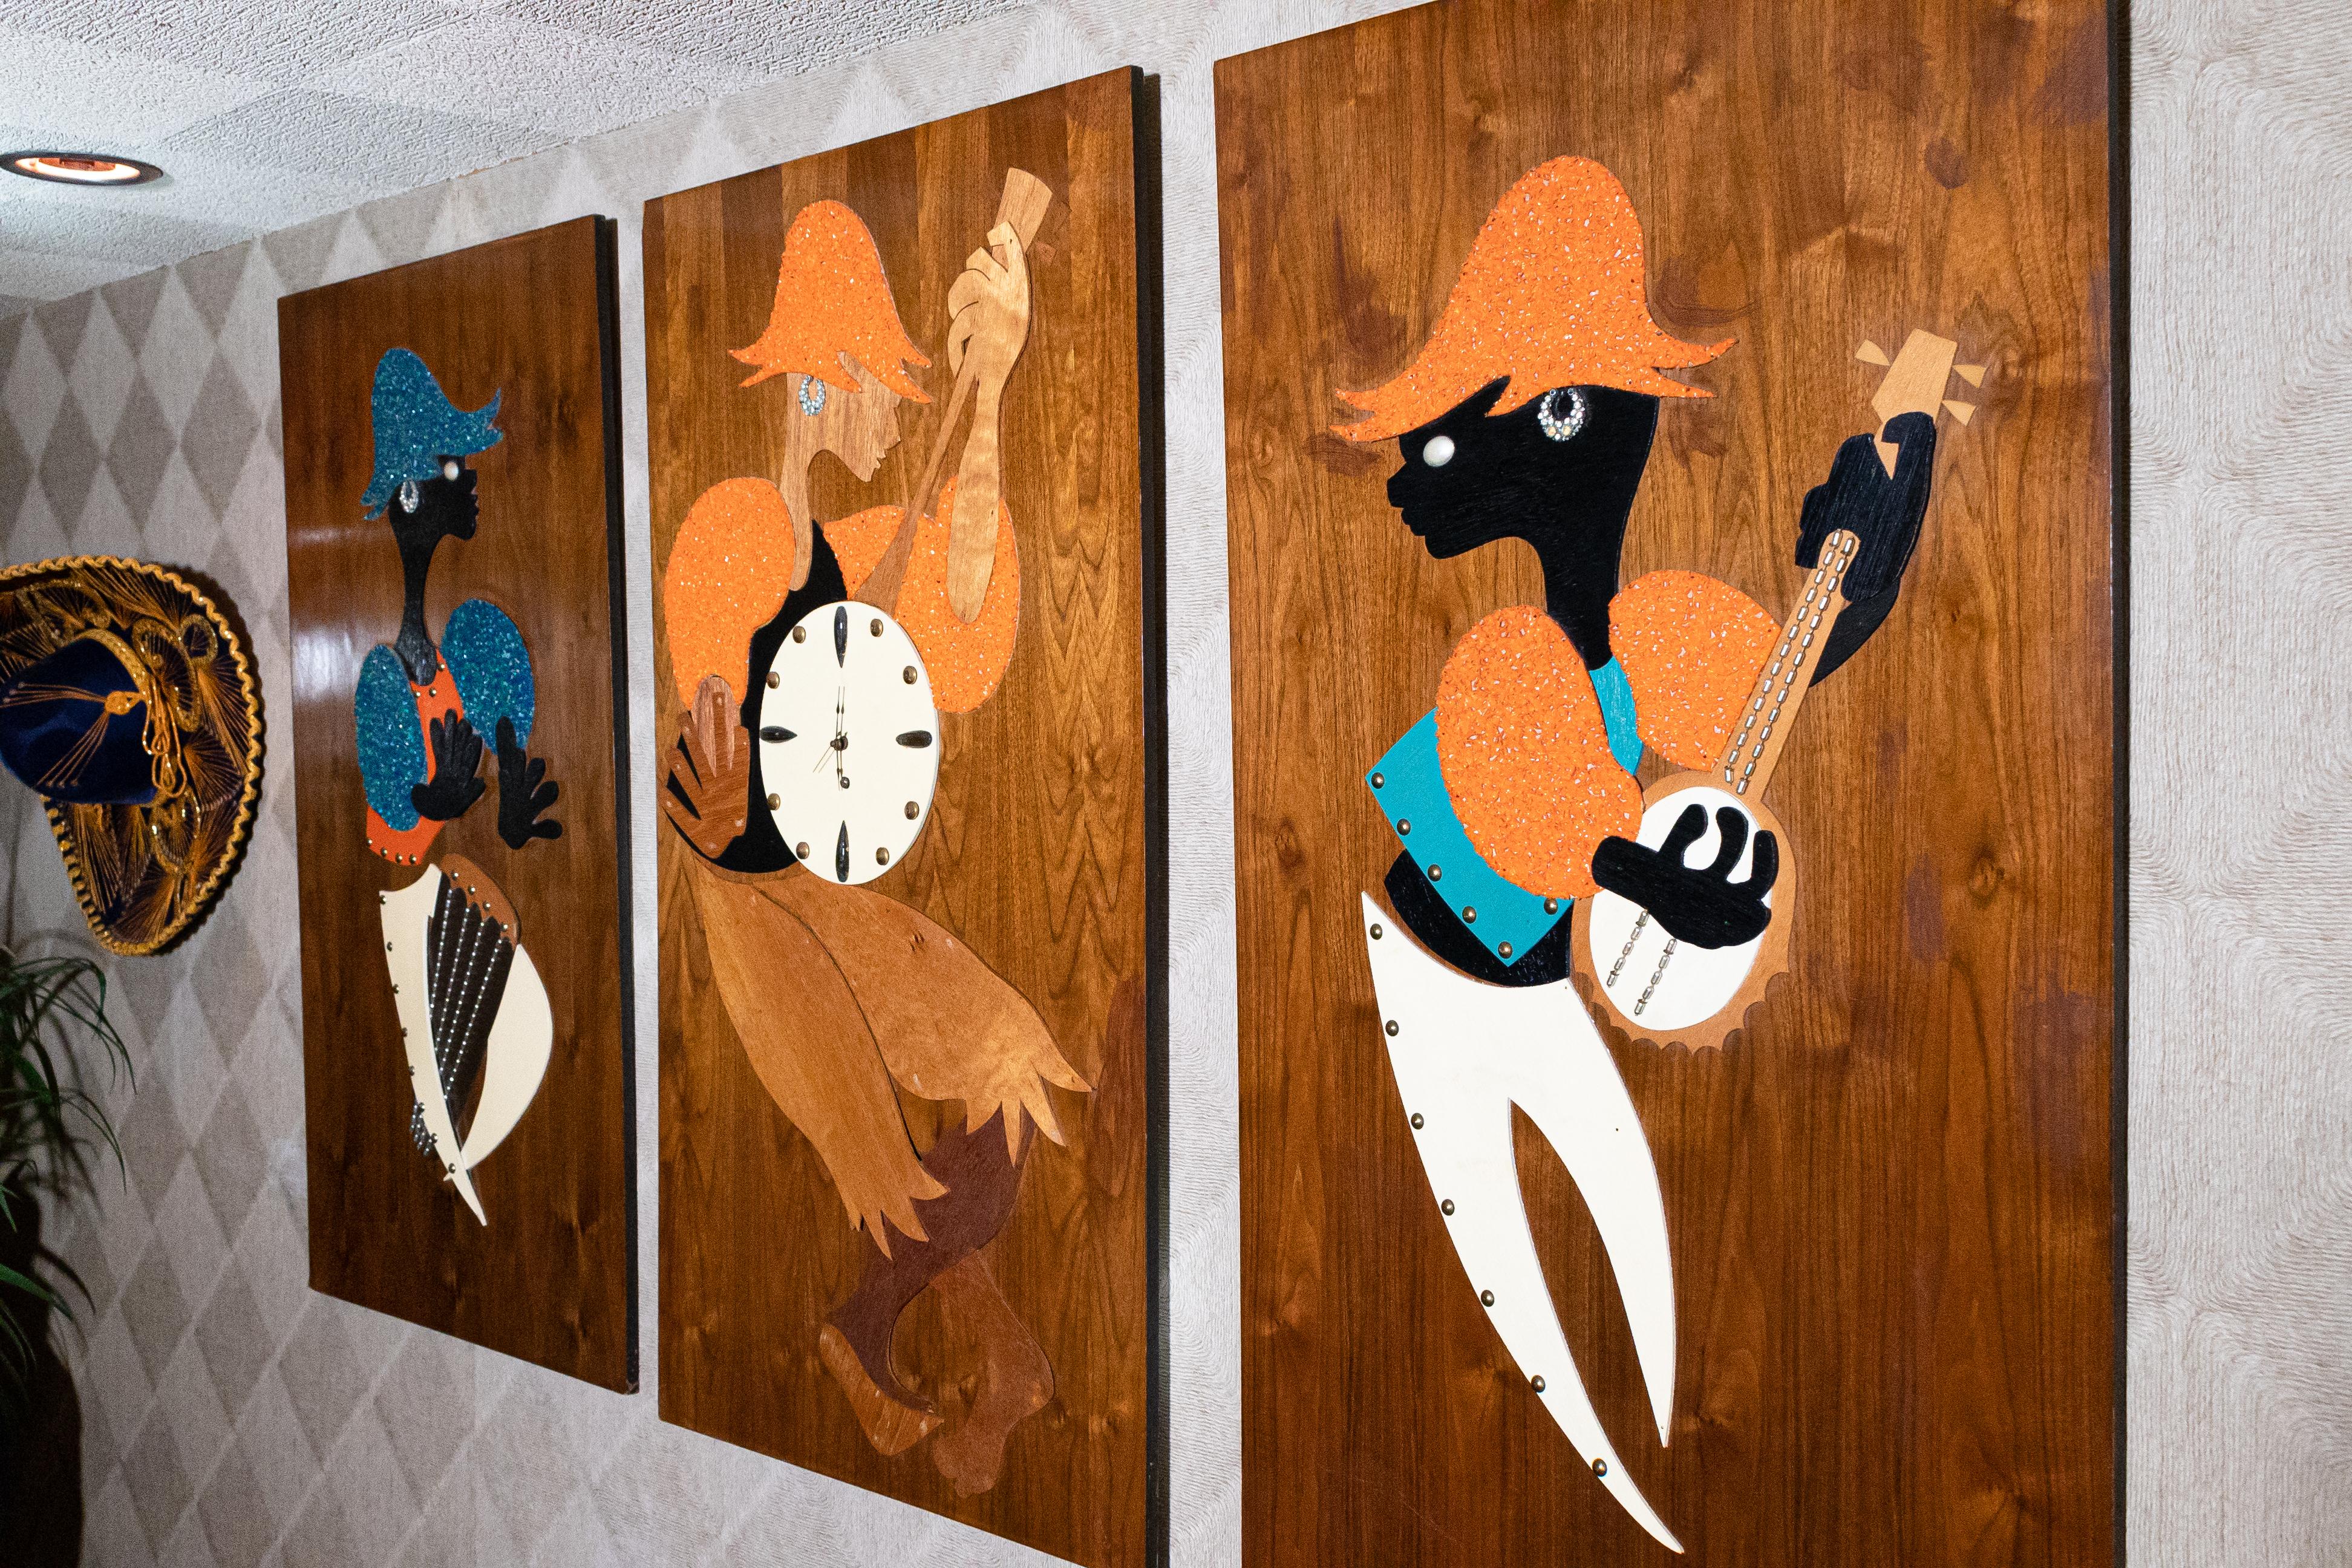 A very fun mixed media triptych art piece with center clock on wood panels. The piece depicts 3 musicians playing two stringed instruments and a drum. The center piece instrument is the clock. In very good vintage condition. This piece measures 24in